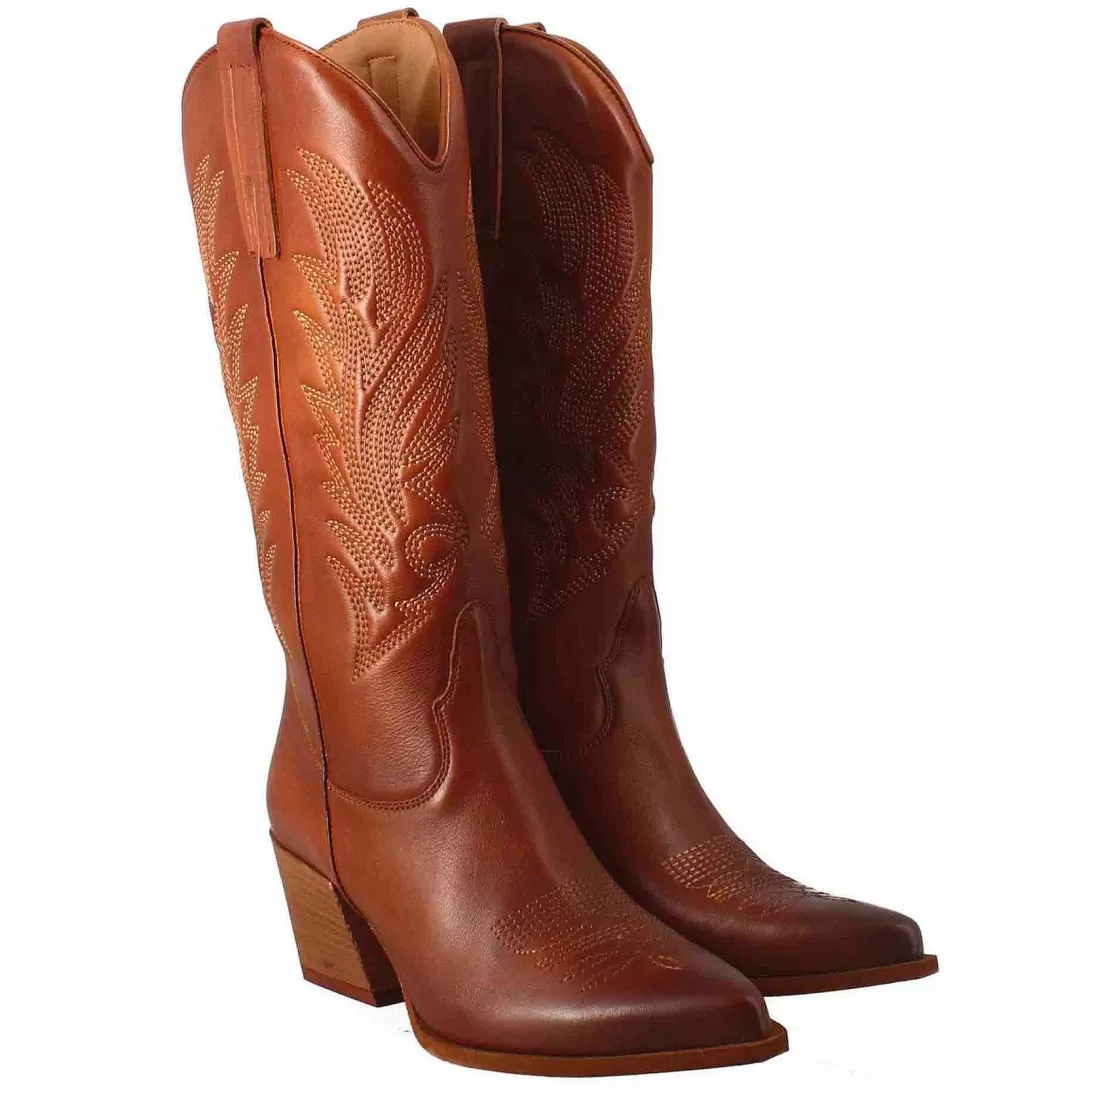 Leonardo Women'S Medium Texan Boots In Brown Leather With Embroidery. Clearance